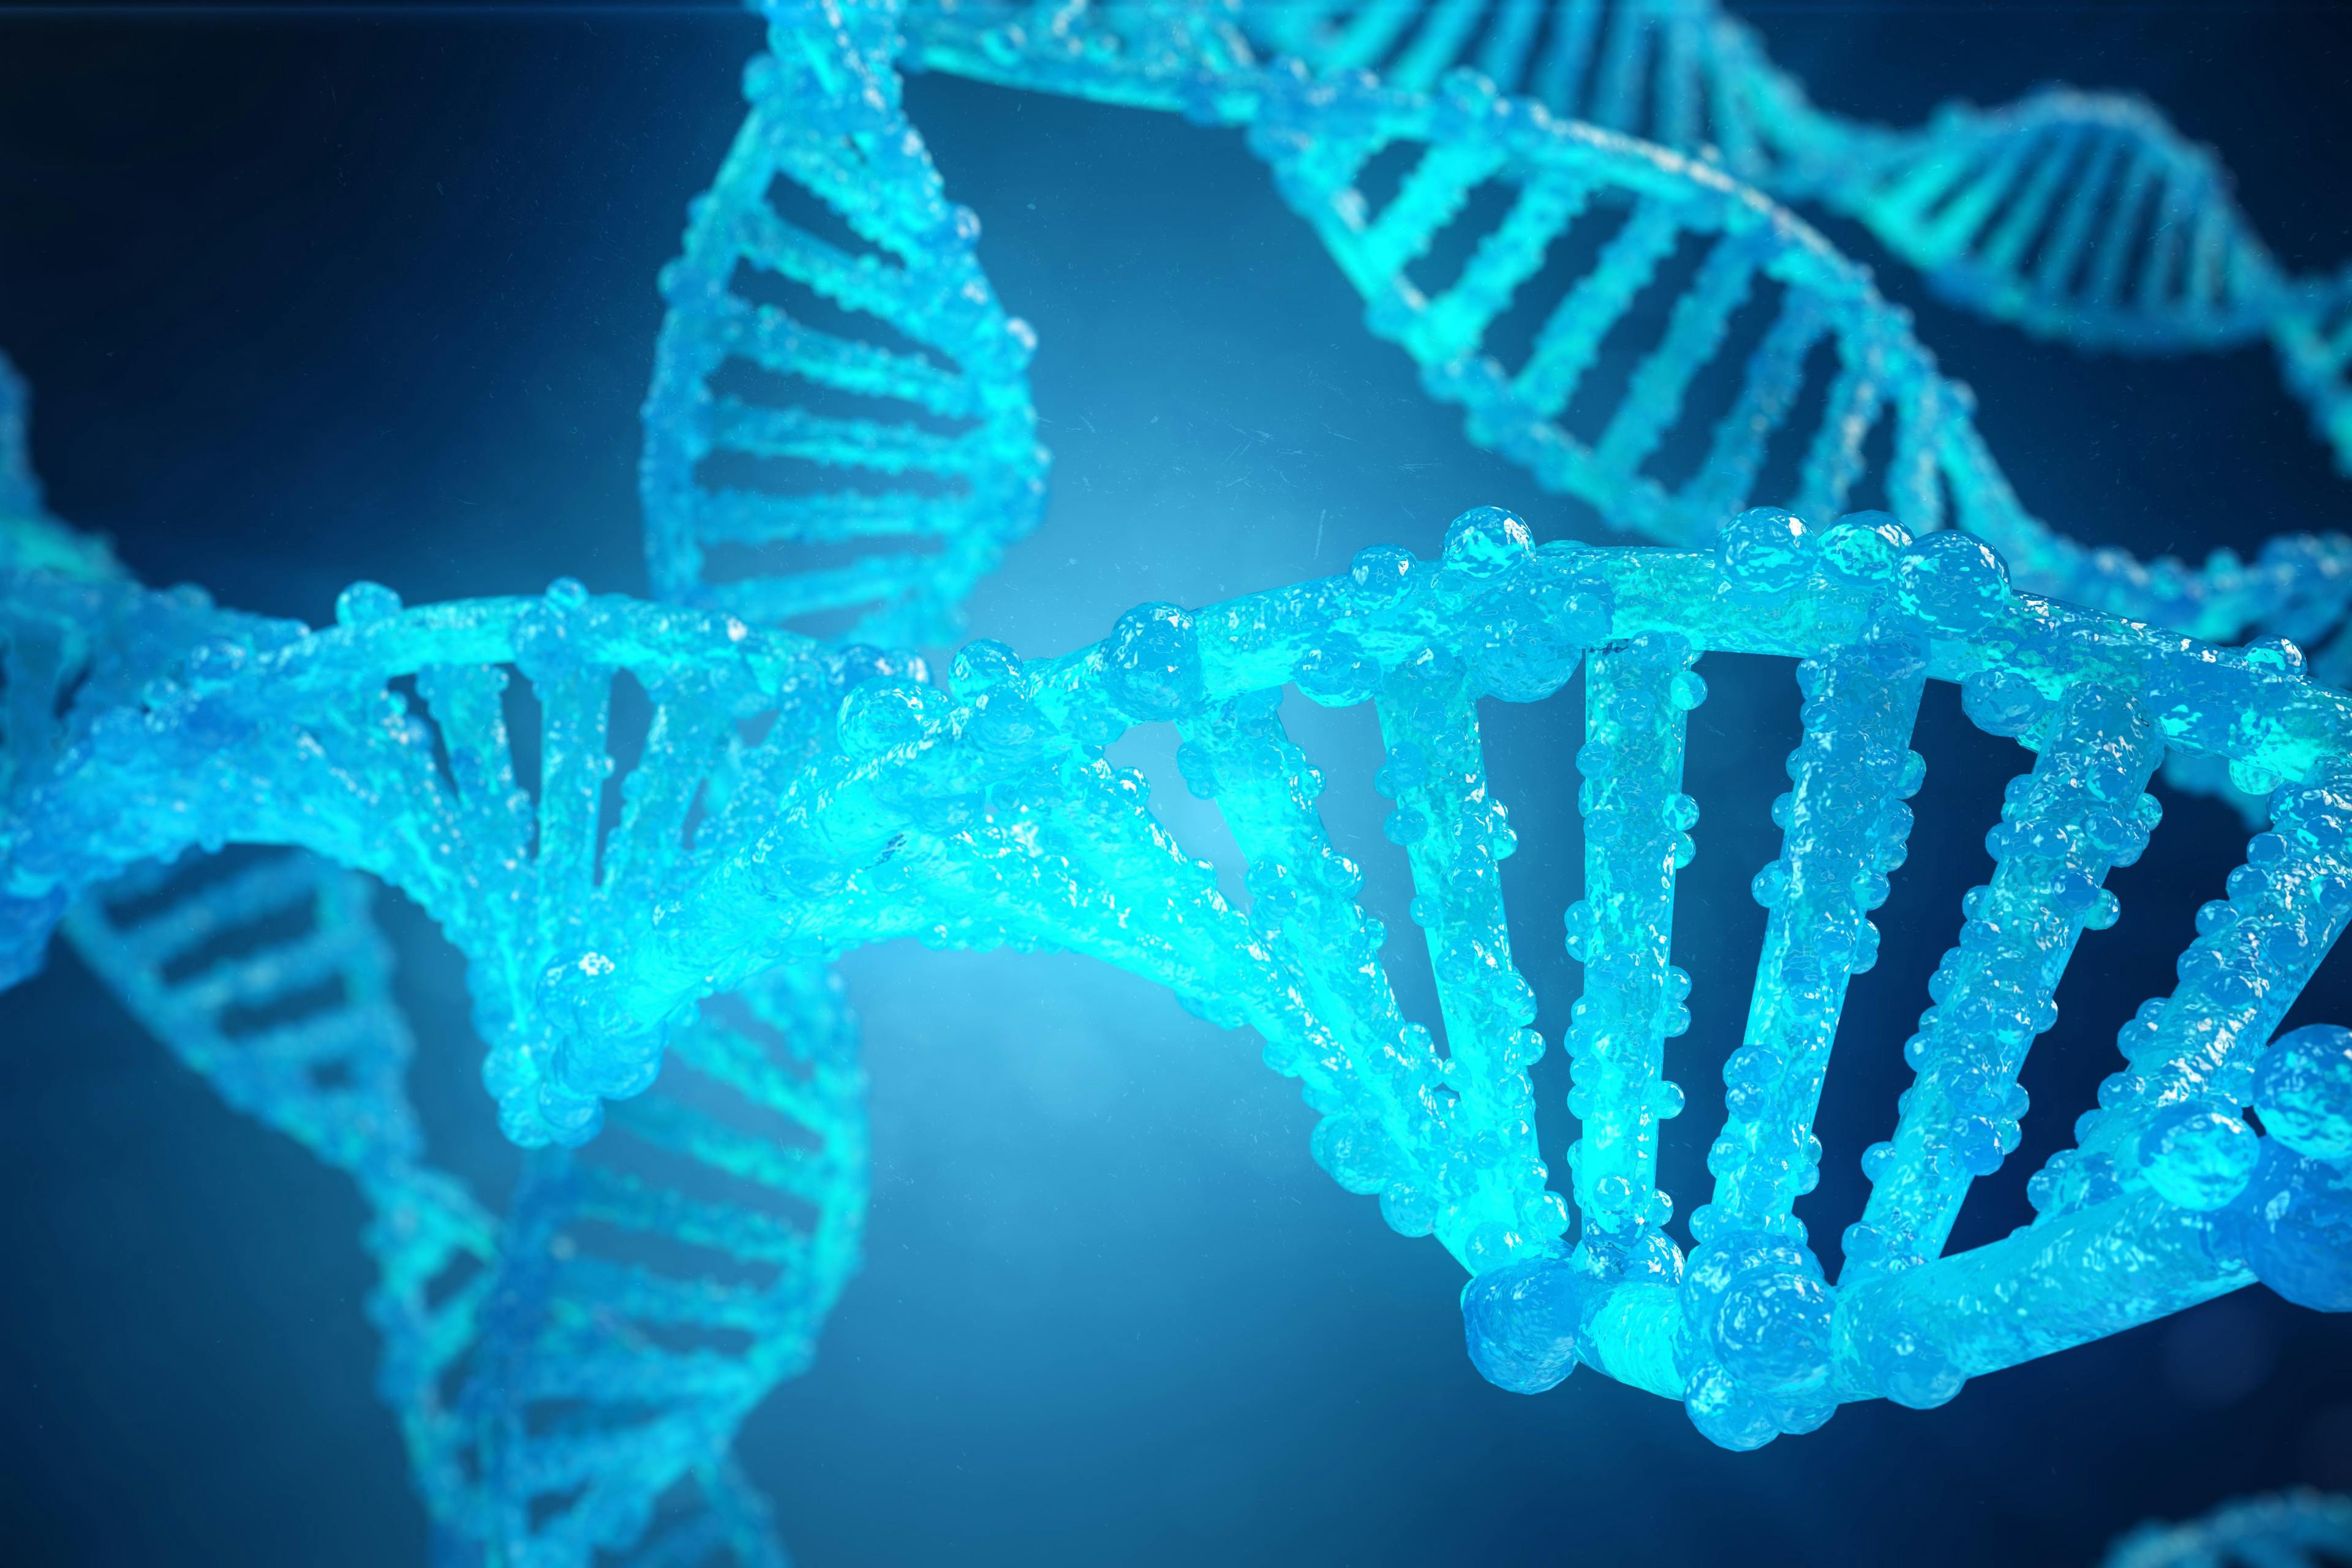 Radiation-Induced Xerostomia Gene Therapy Shows Promise in Phase 1 Trial 